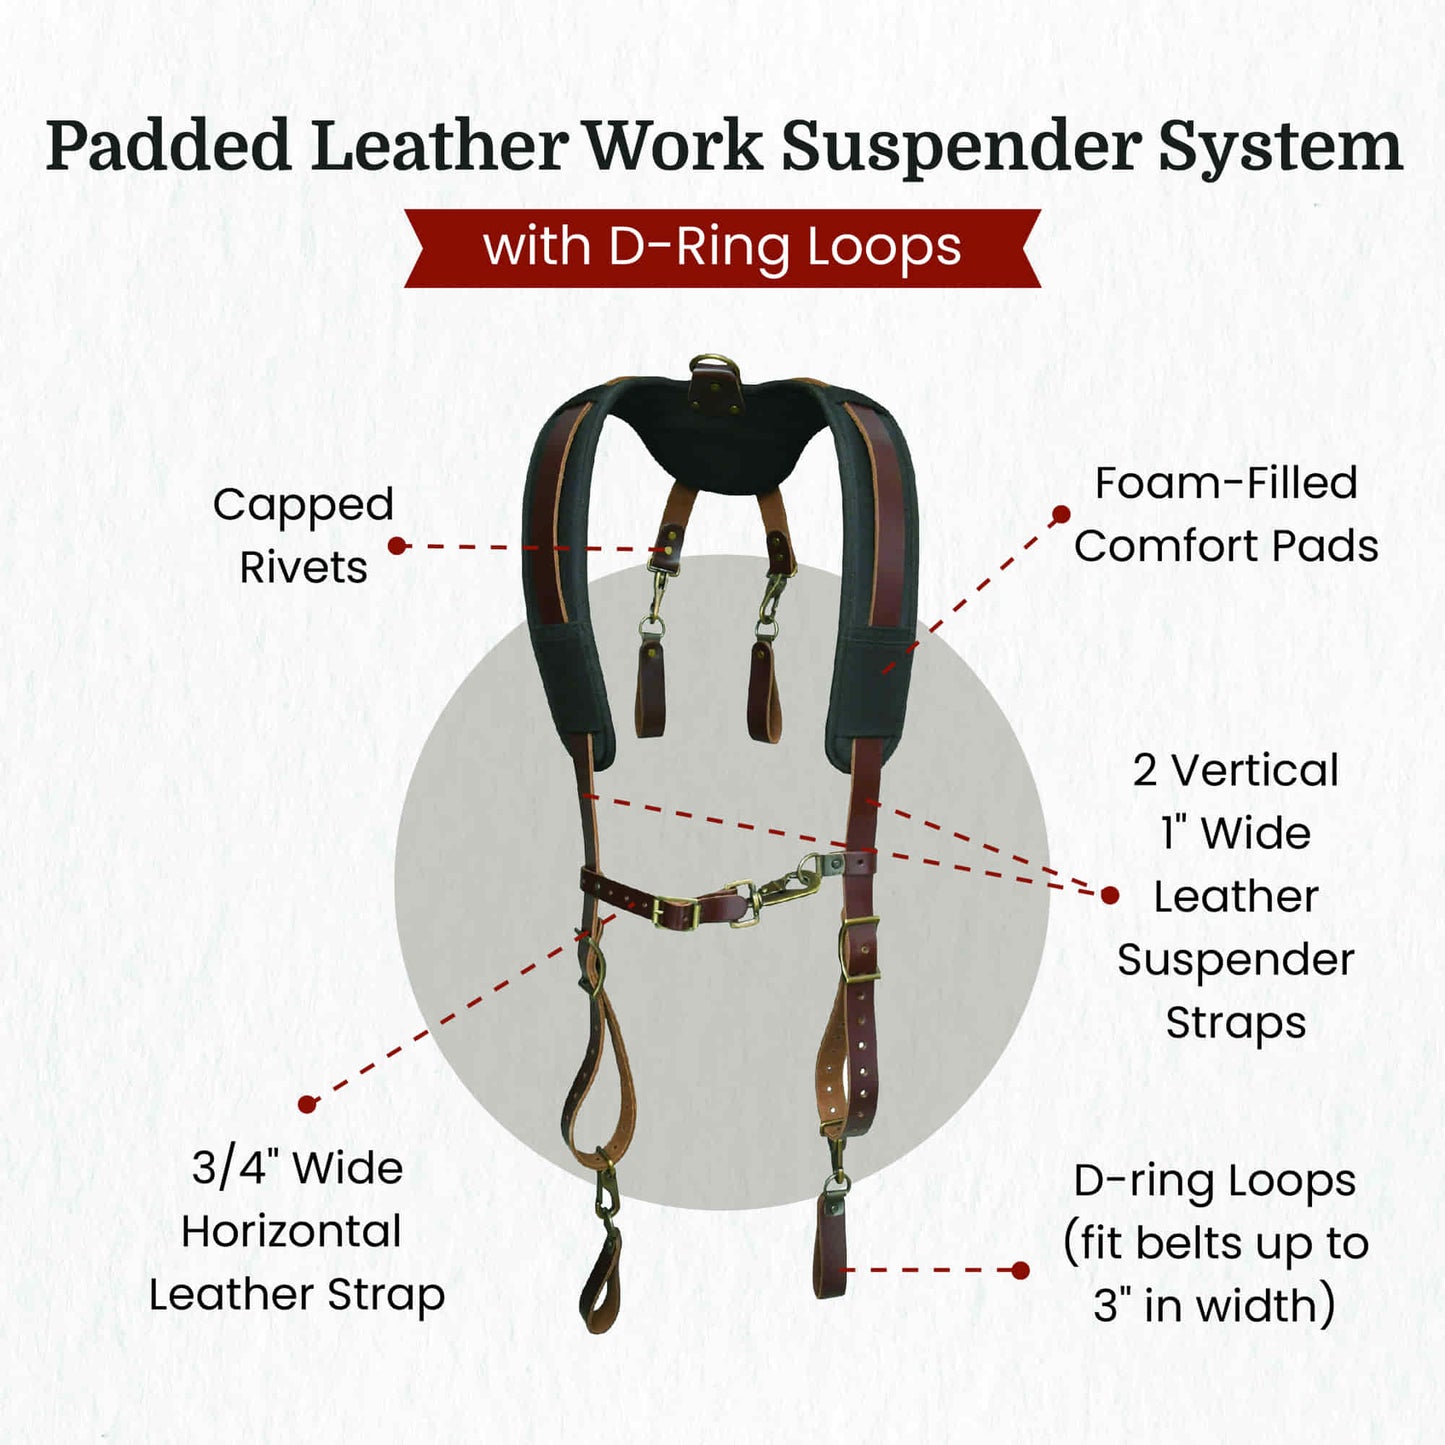 Style n Craft 98214 - Padded Leather Work Suspender System with D-ring Loops & the Slide-Through Pads - Outside Front View When it is Worn - Showing the details